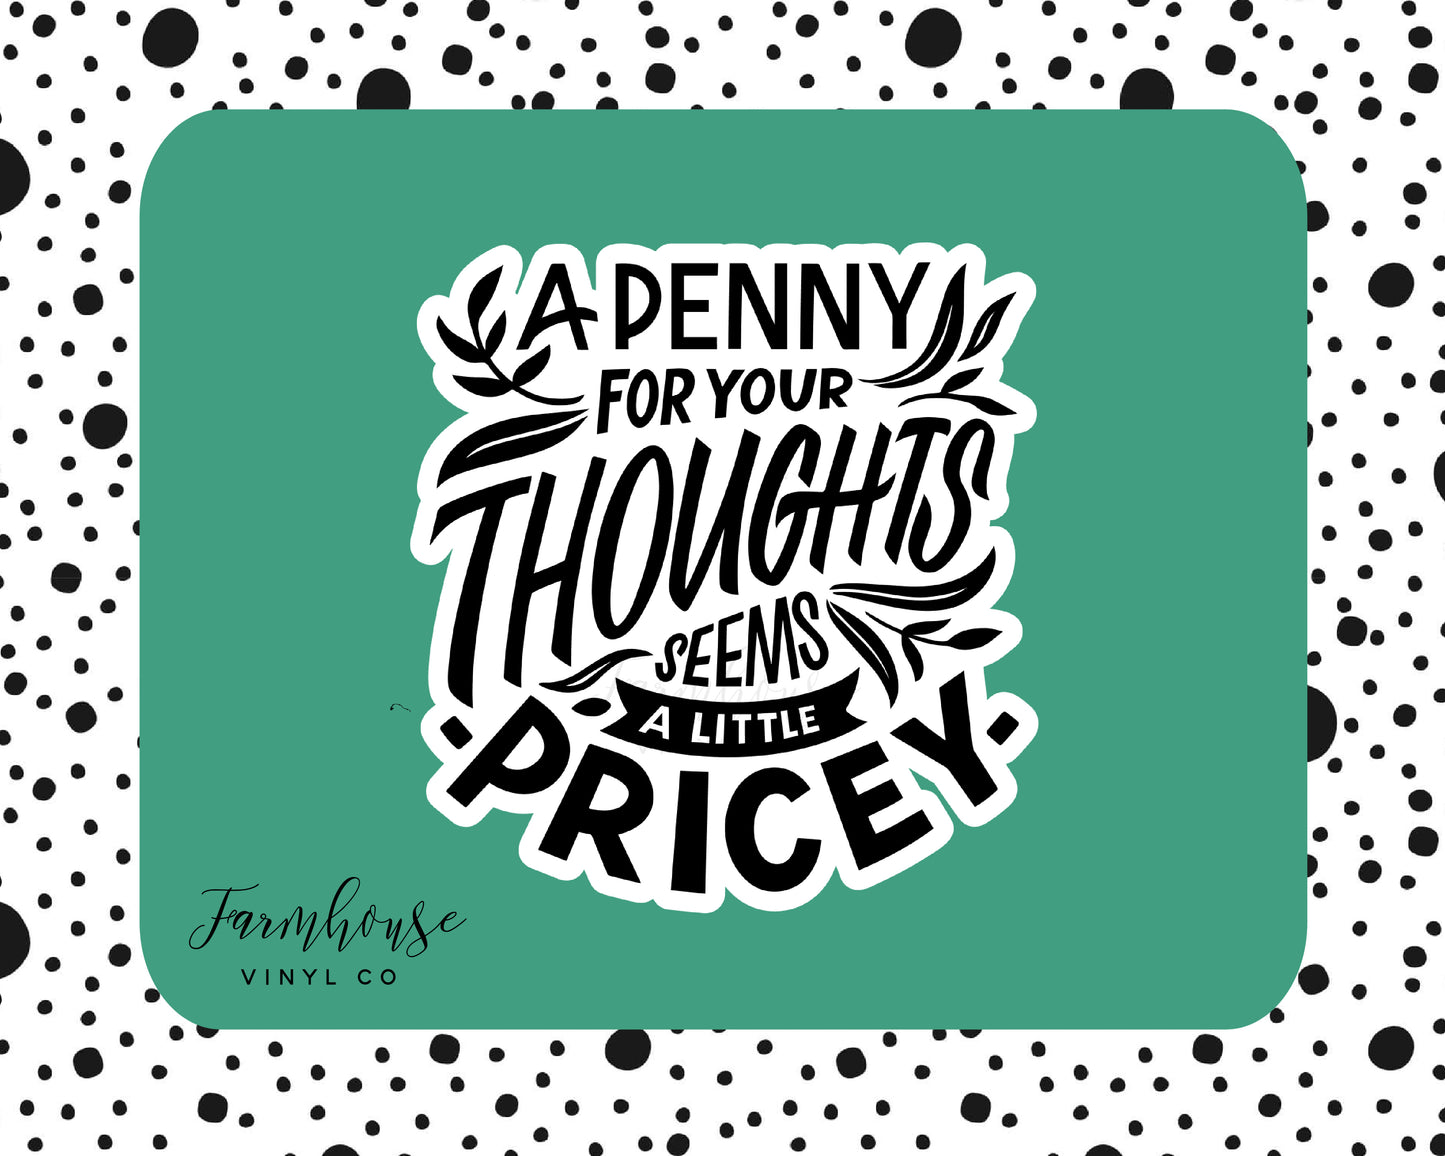 A Penny for Your Thoughts Seems a Little Pricey Kiss Cut Sticker - Farmhouse Vinyl Co